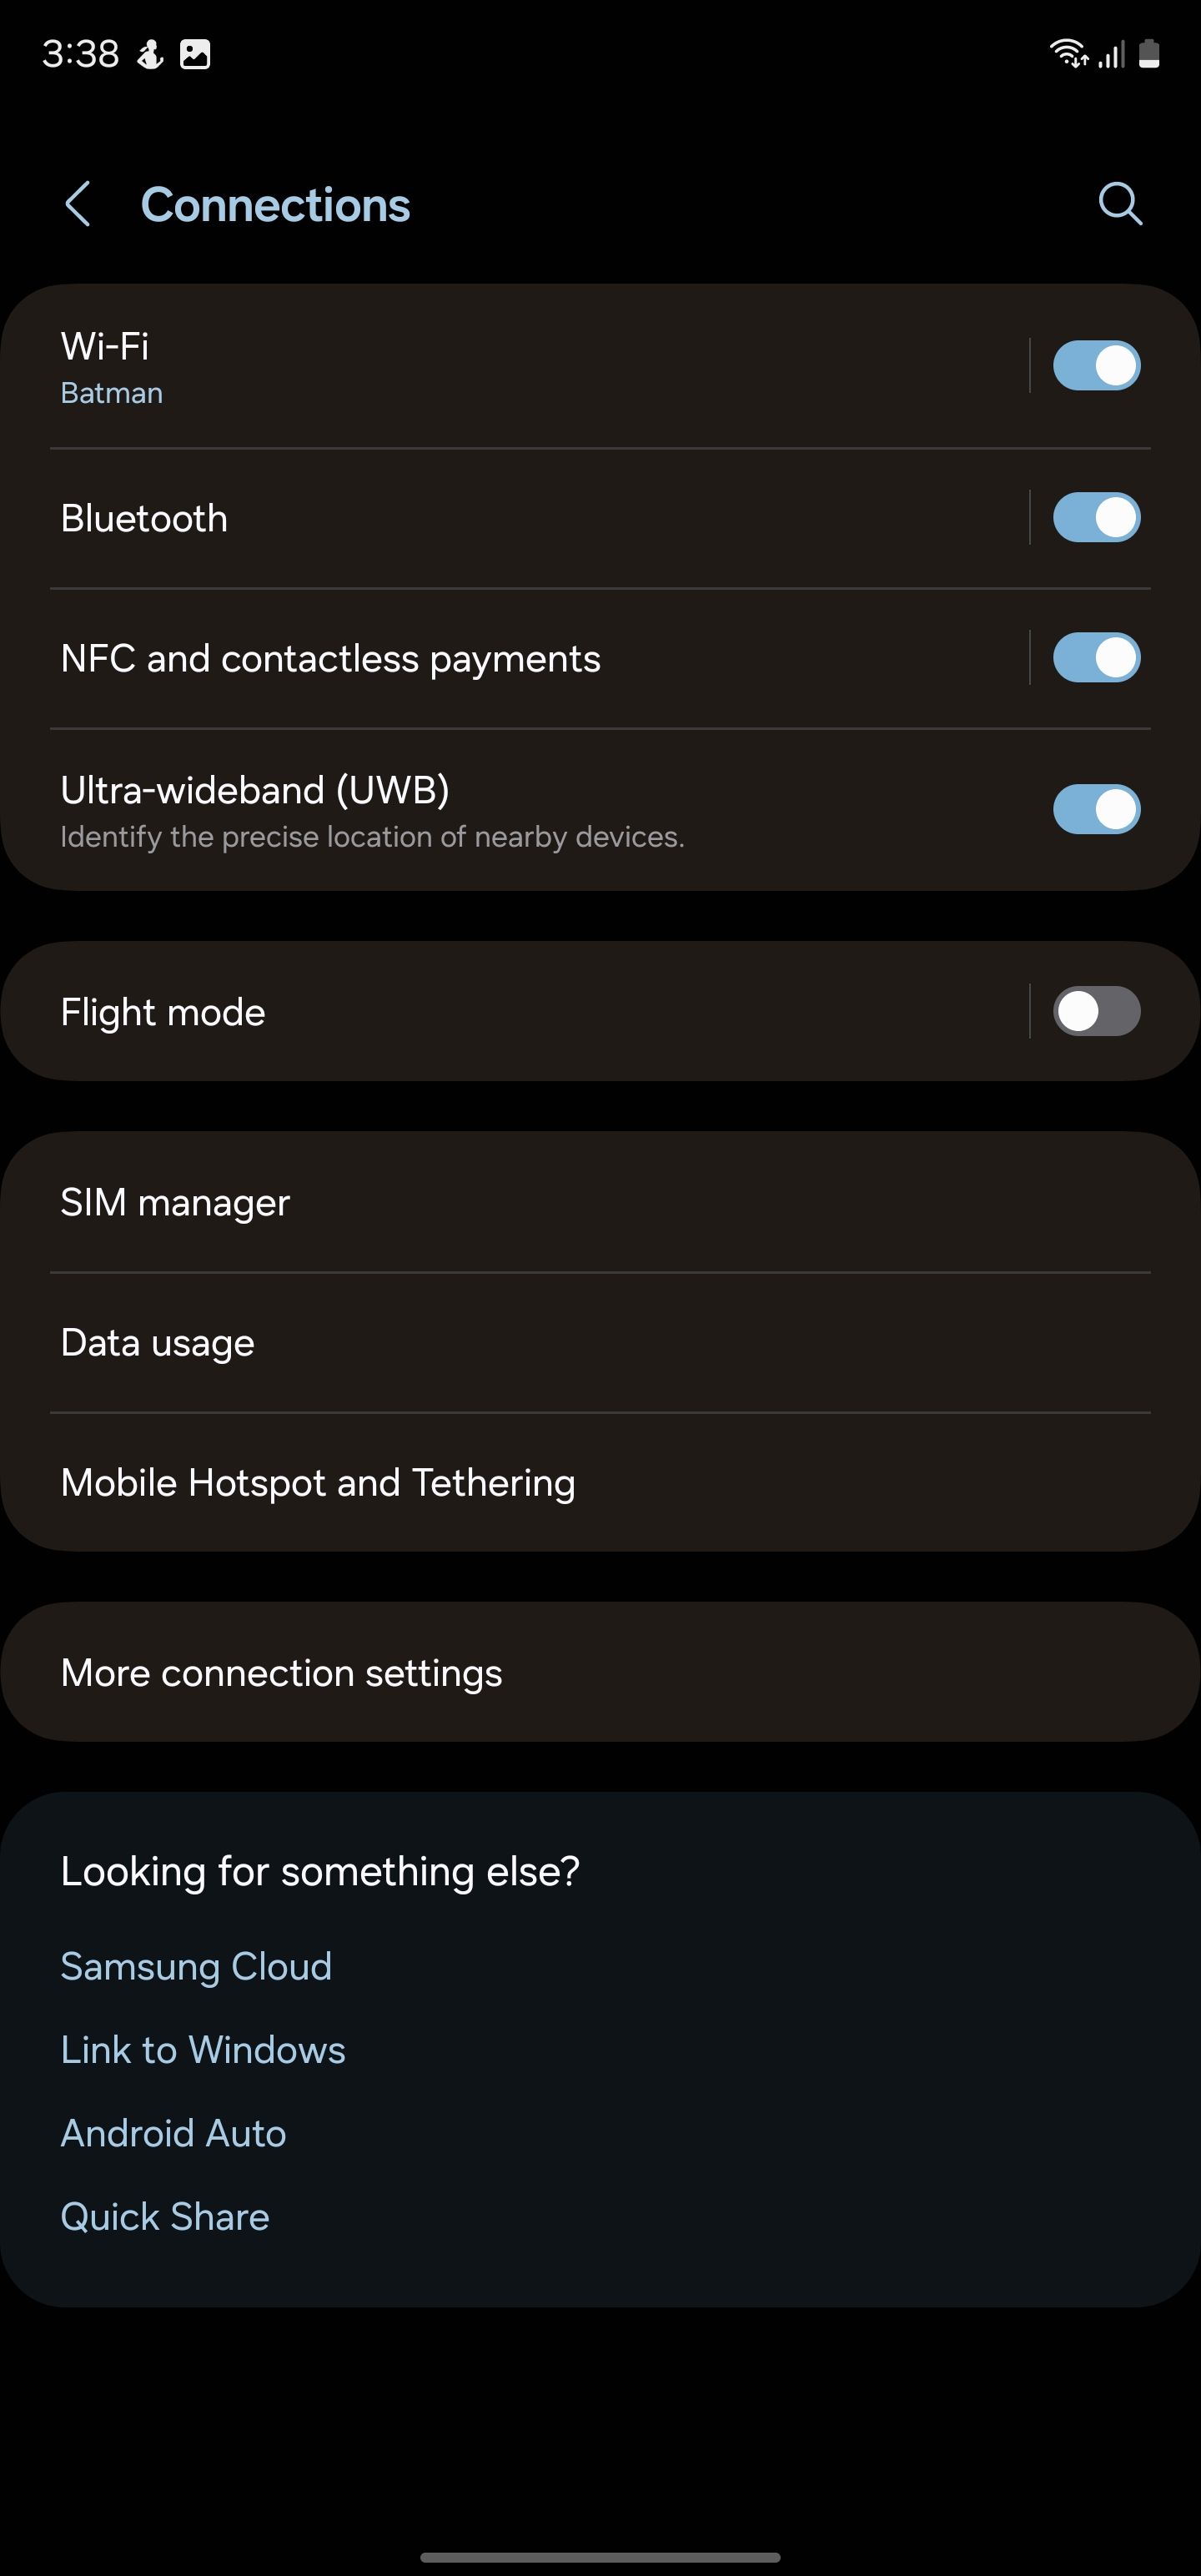 Connections menu in One UI 6 on a Samsung phone